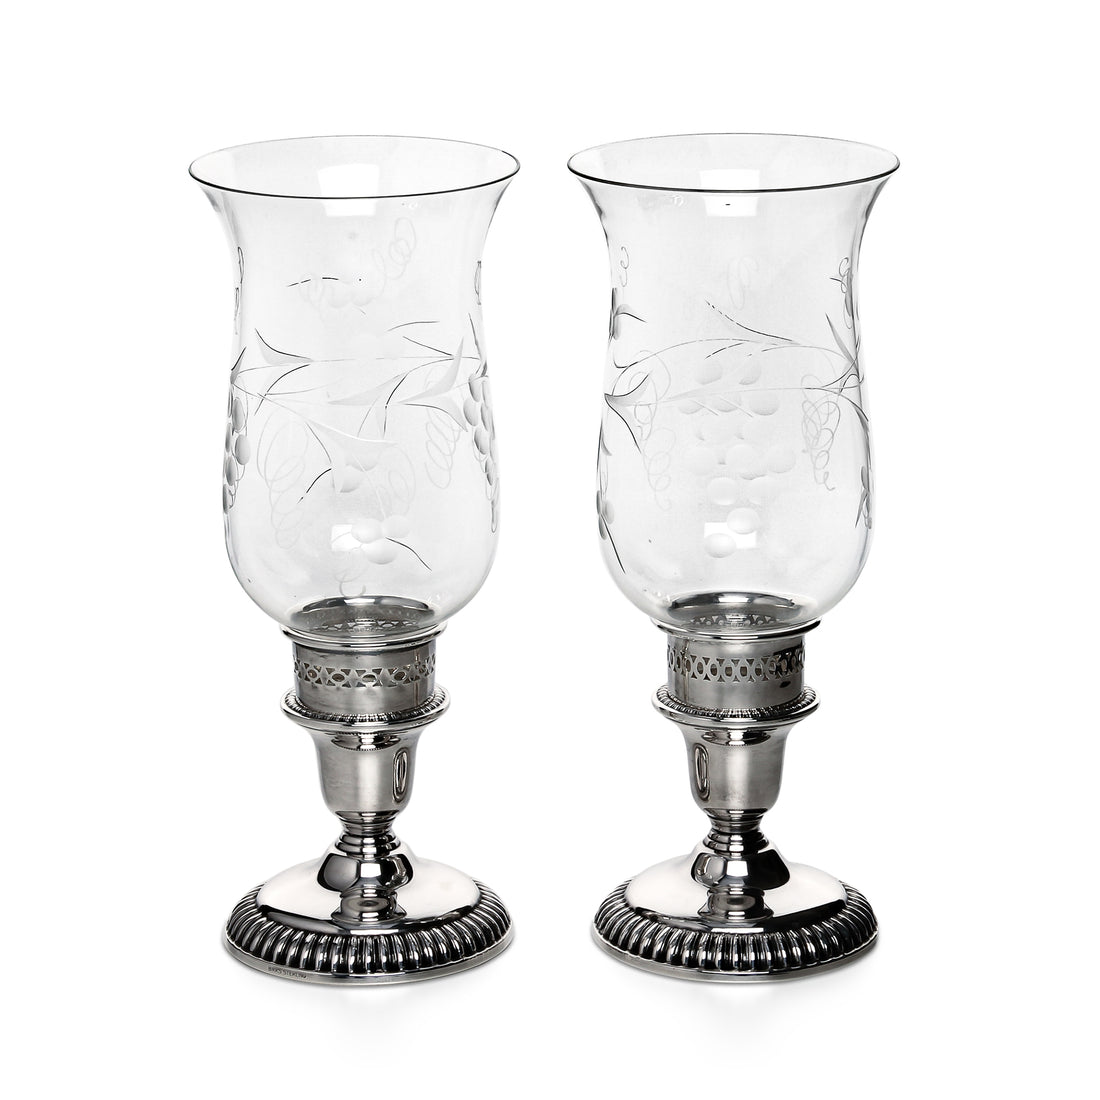 BIRKS Sterling Silver Candleholders with Crystal Hurricanes - Set of 2